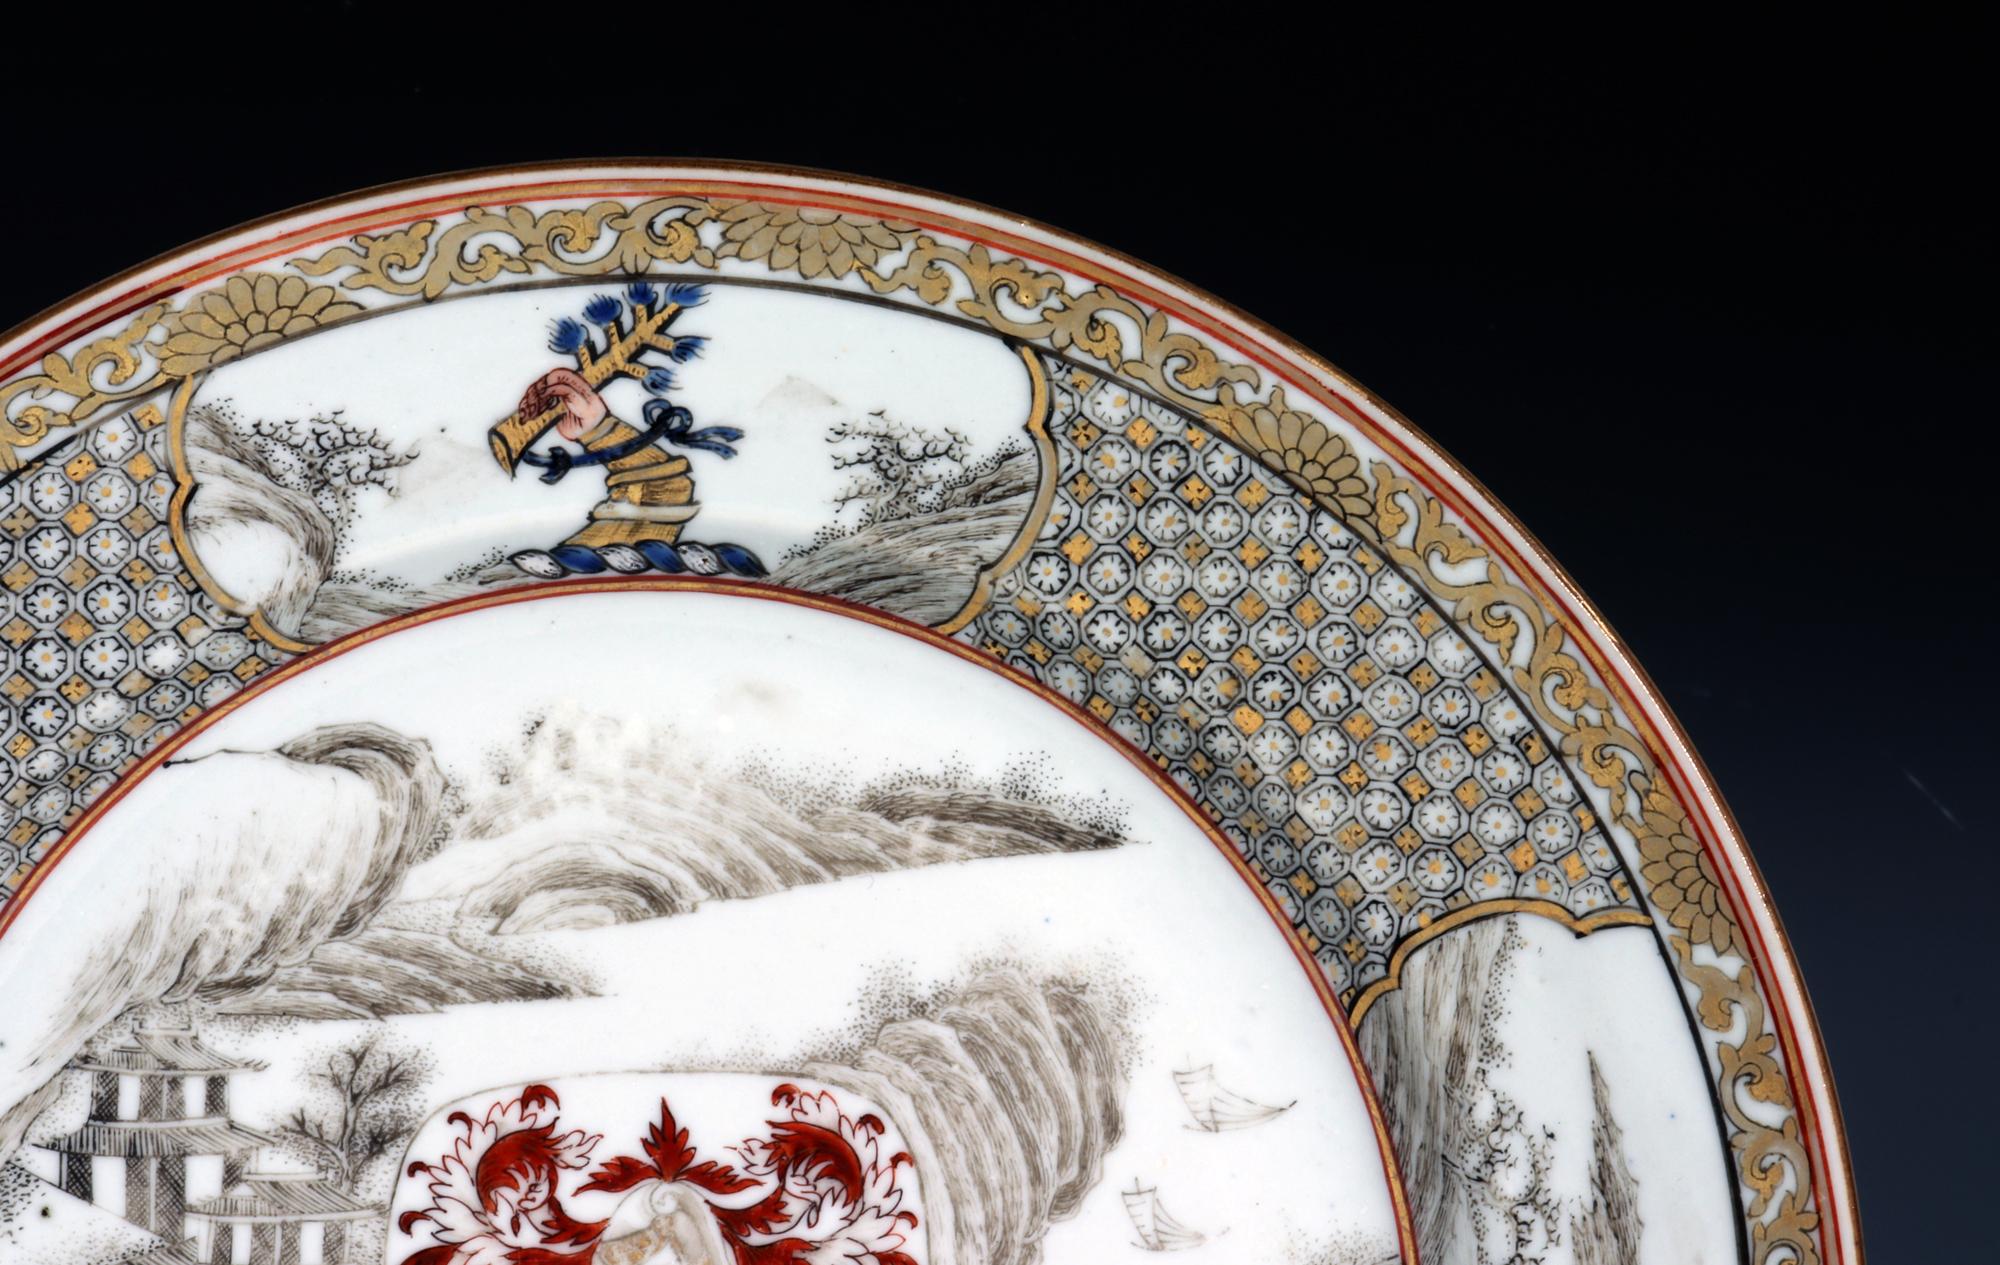 Yongzheng Chinese Export Porcelain Plate with Arms of Elwick of Middlesex For Sale 2